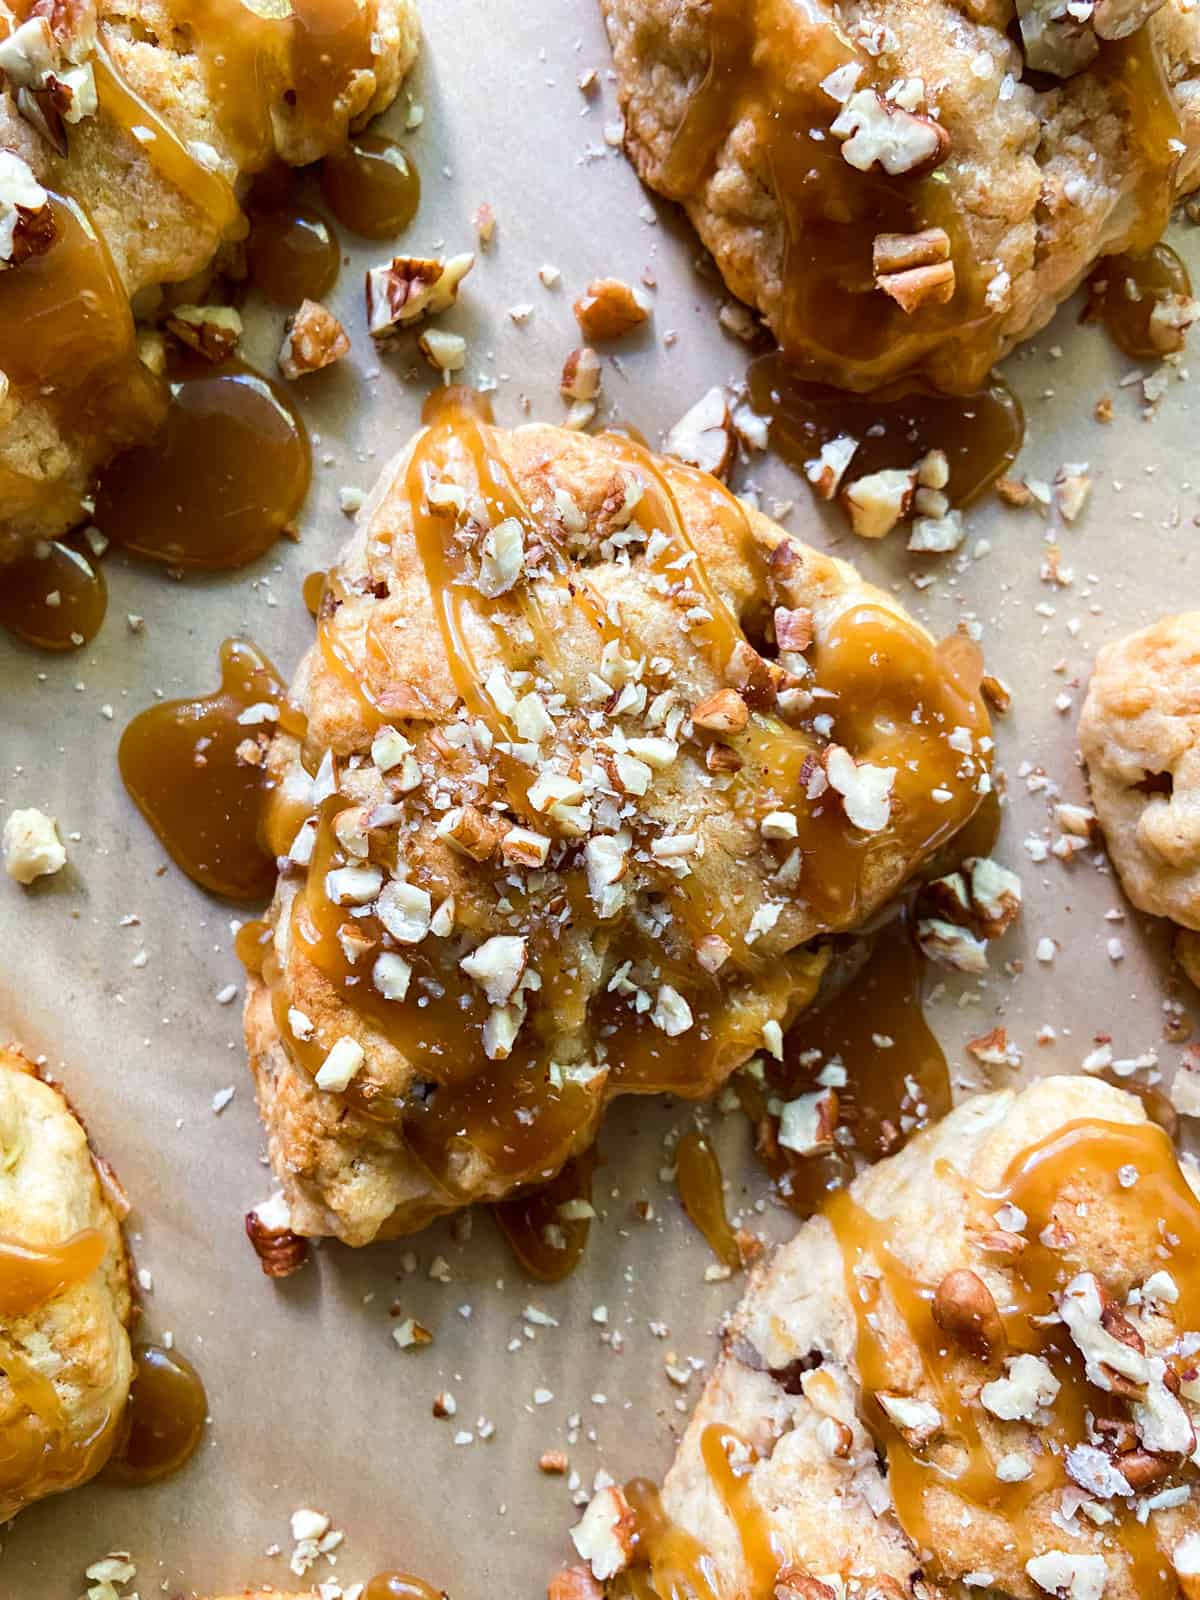 An apple scone with caramel glaze and chopped pecan garnish.